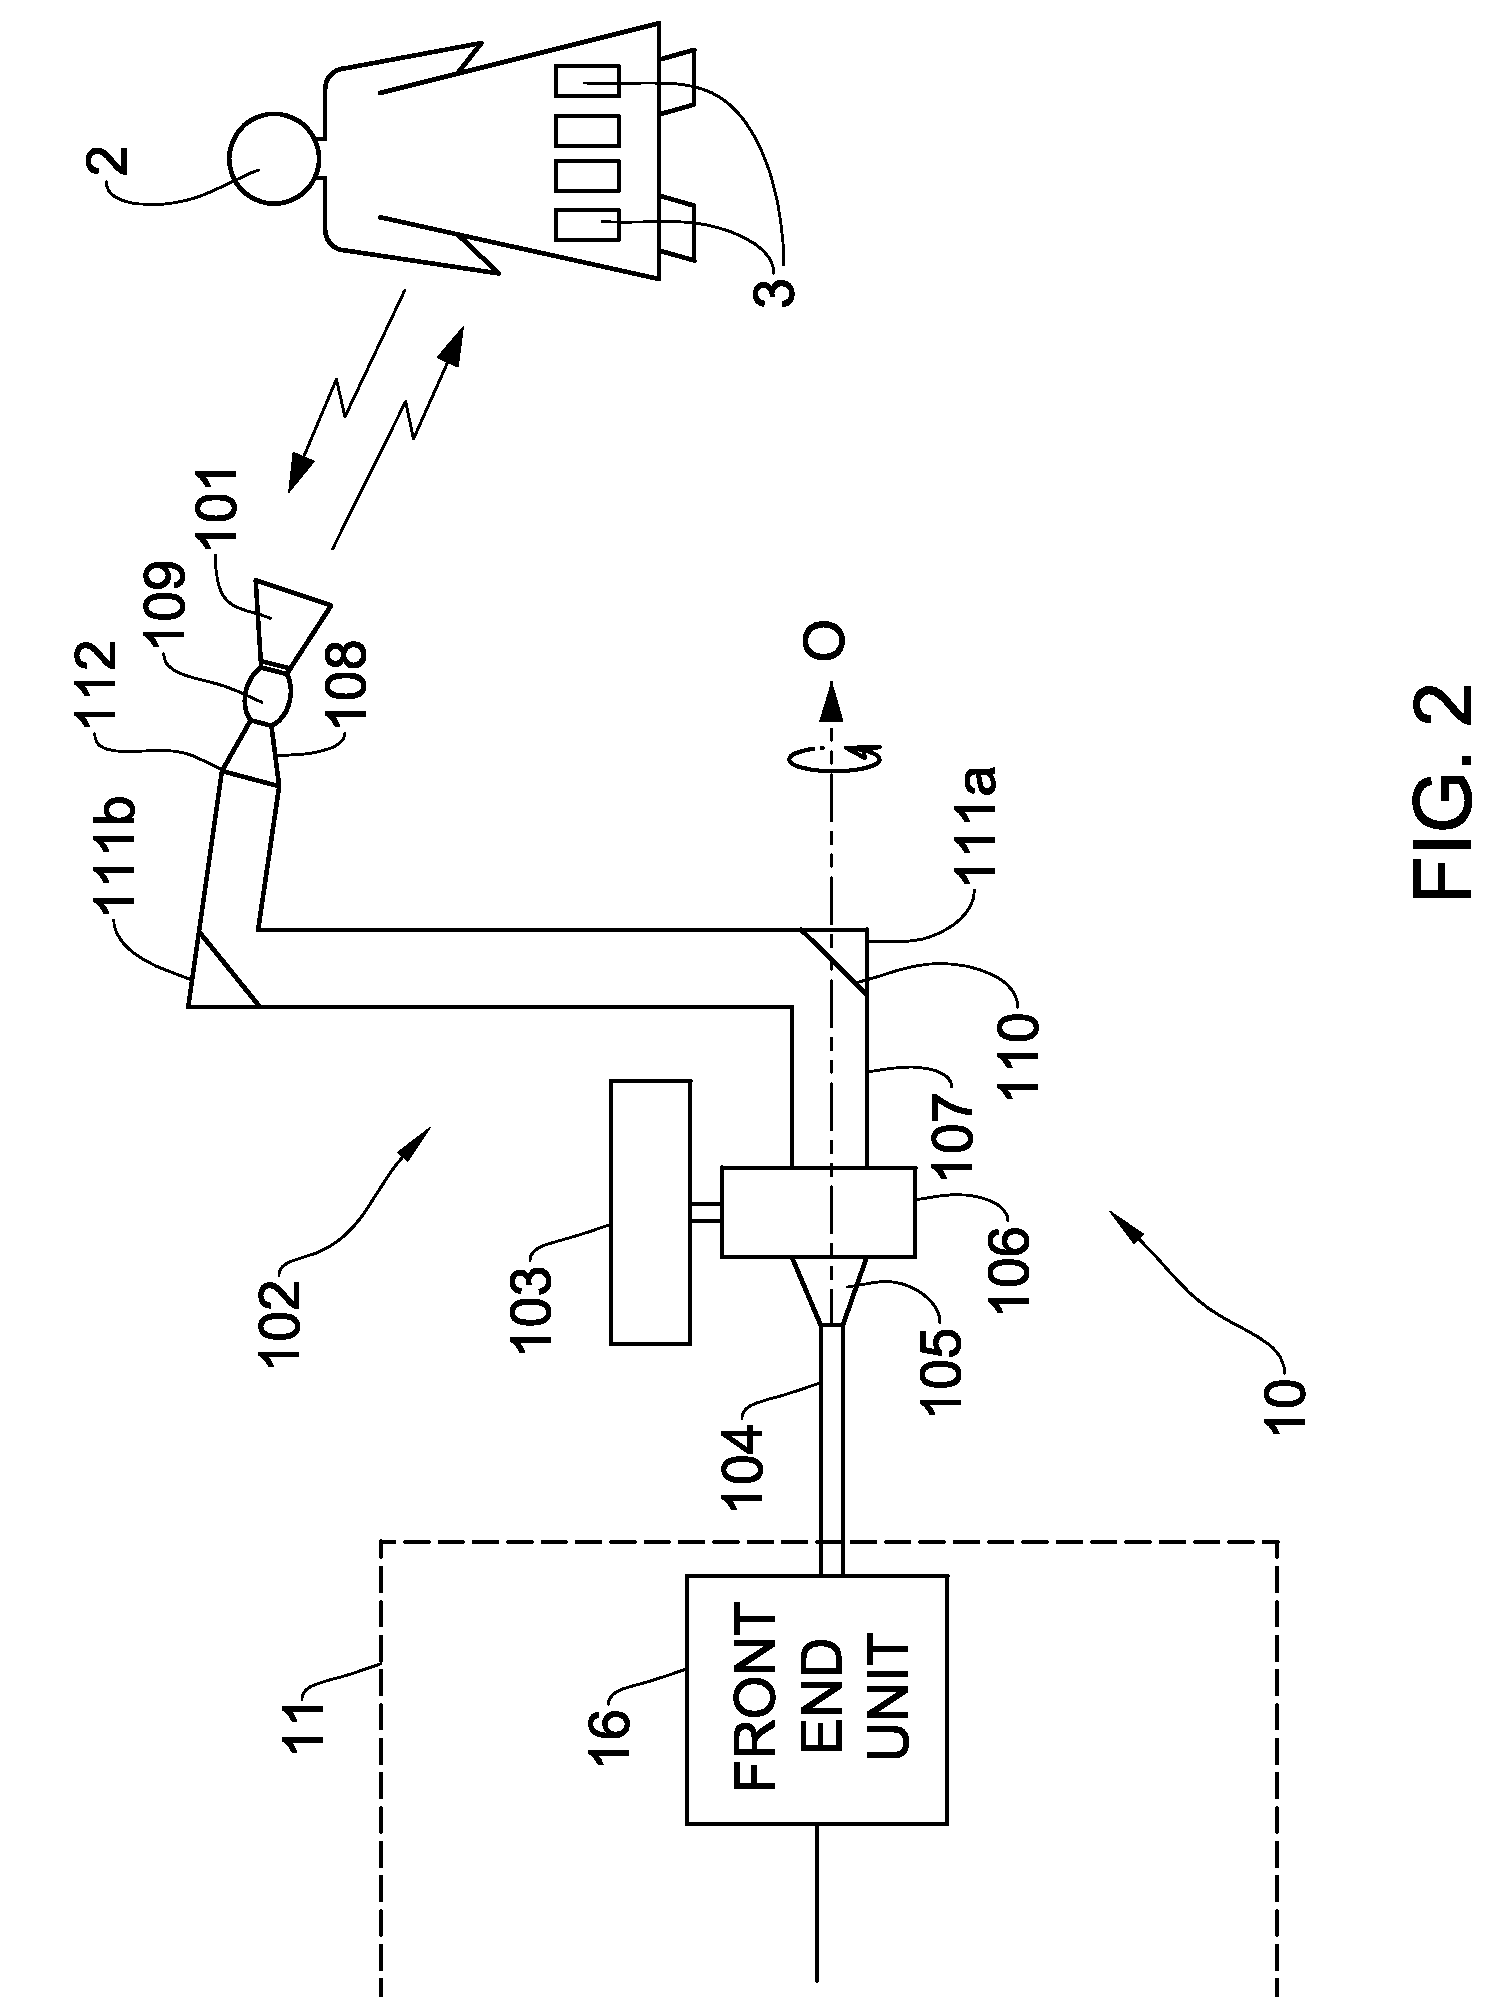 System and method for imaging objects